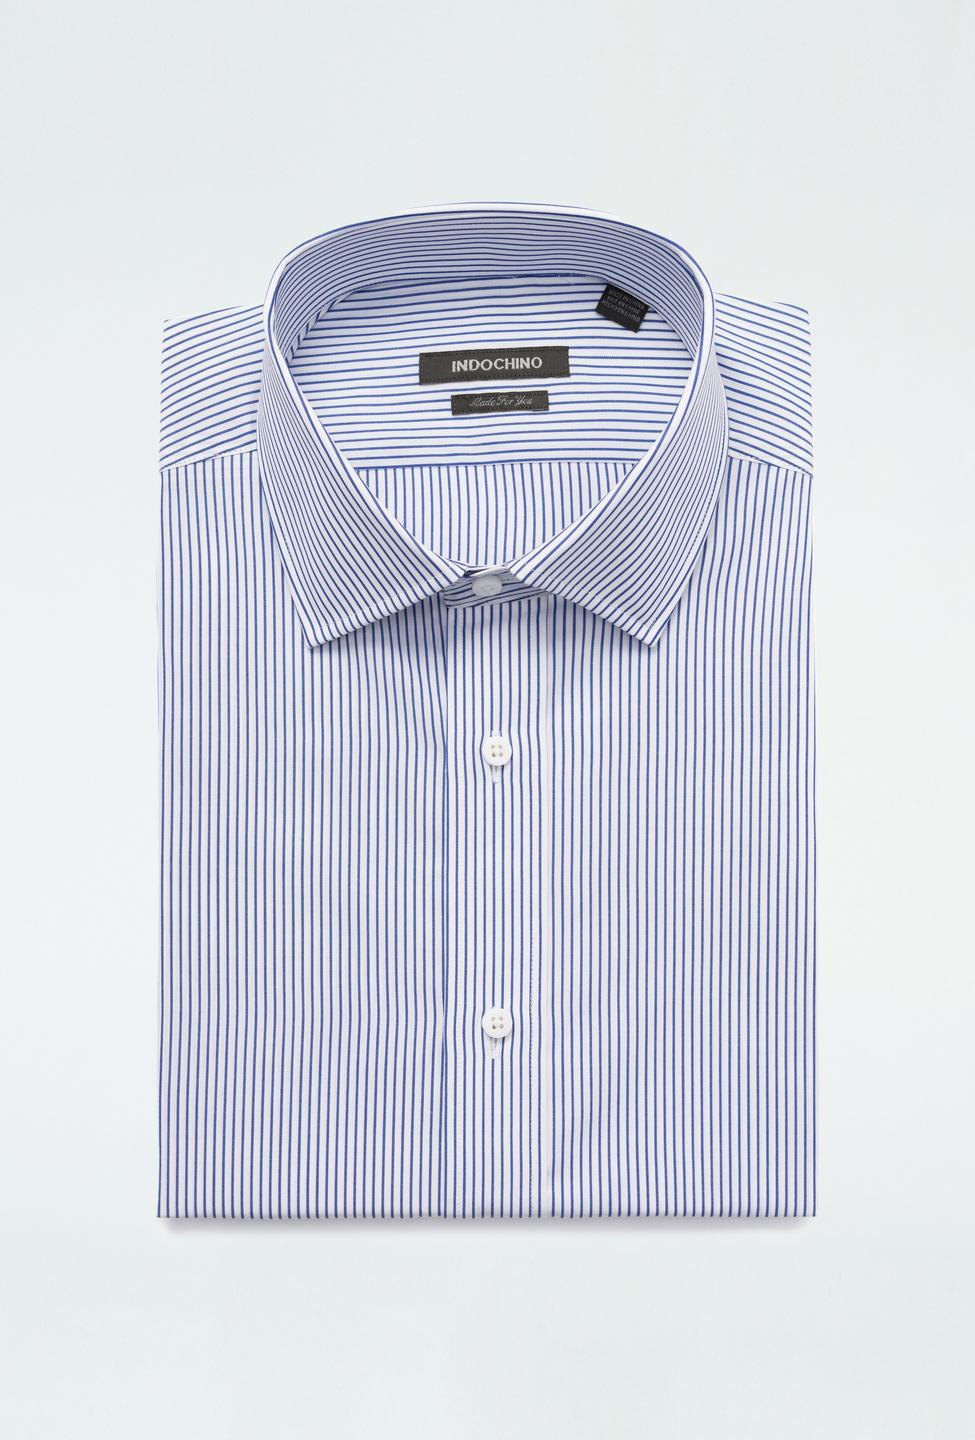 Navy shirt - Harrow Striped Design from Premium Indochino Collection